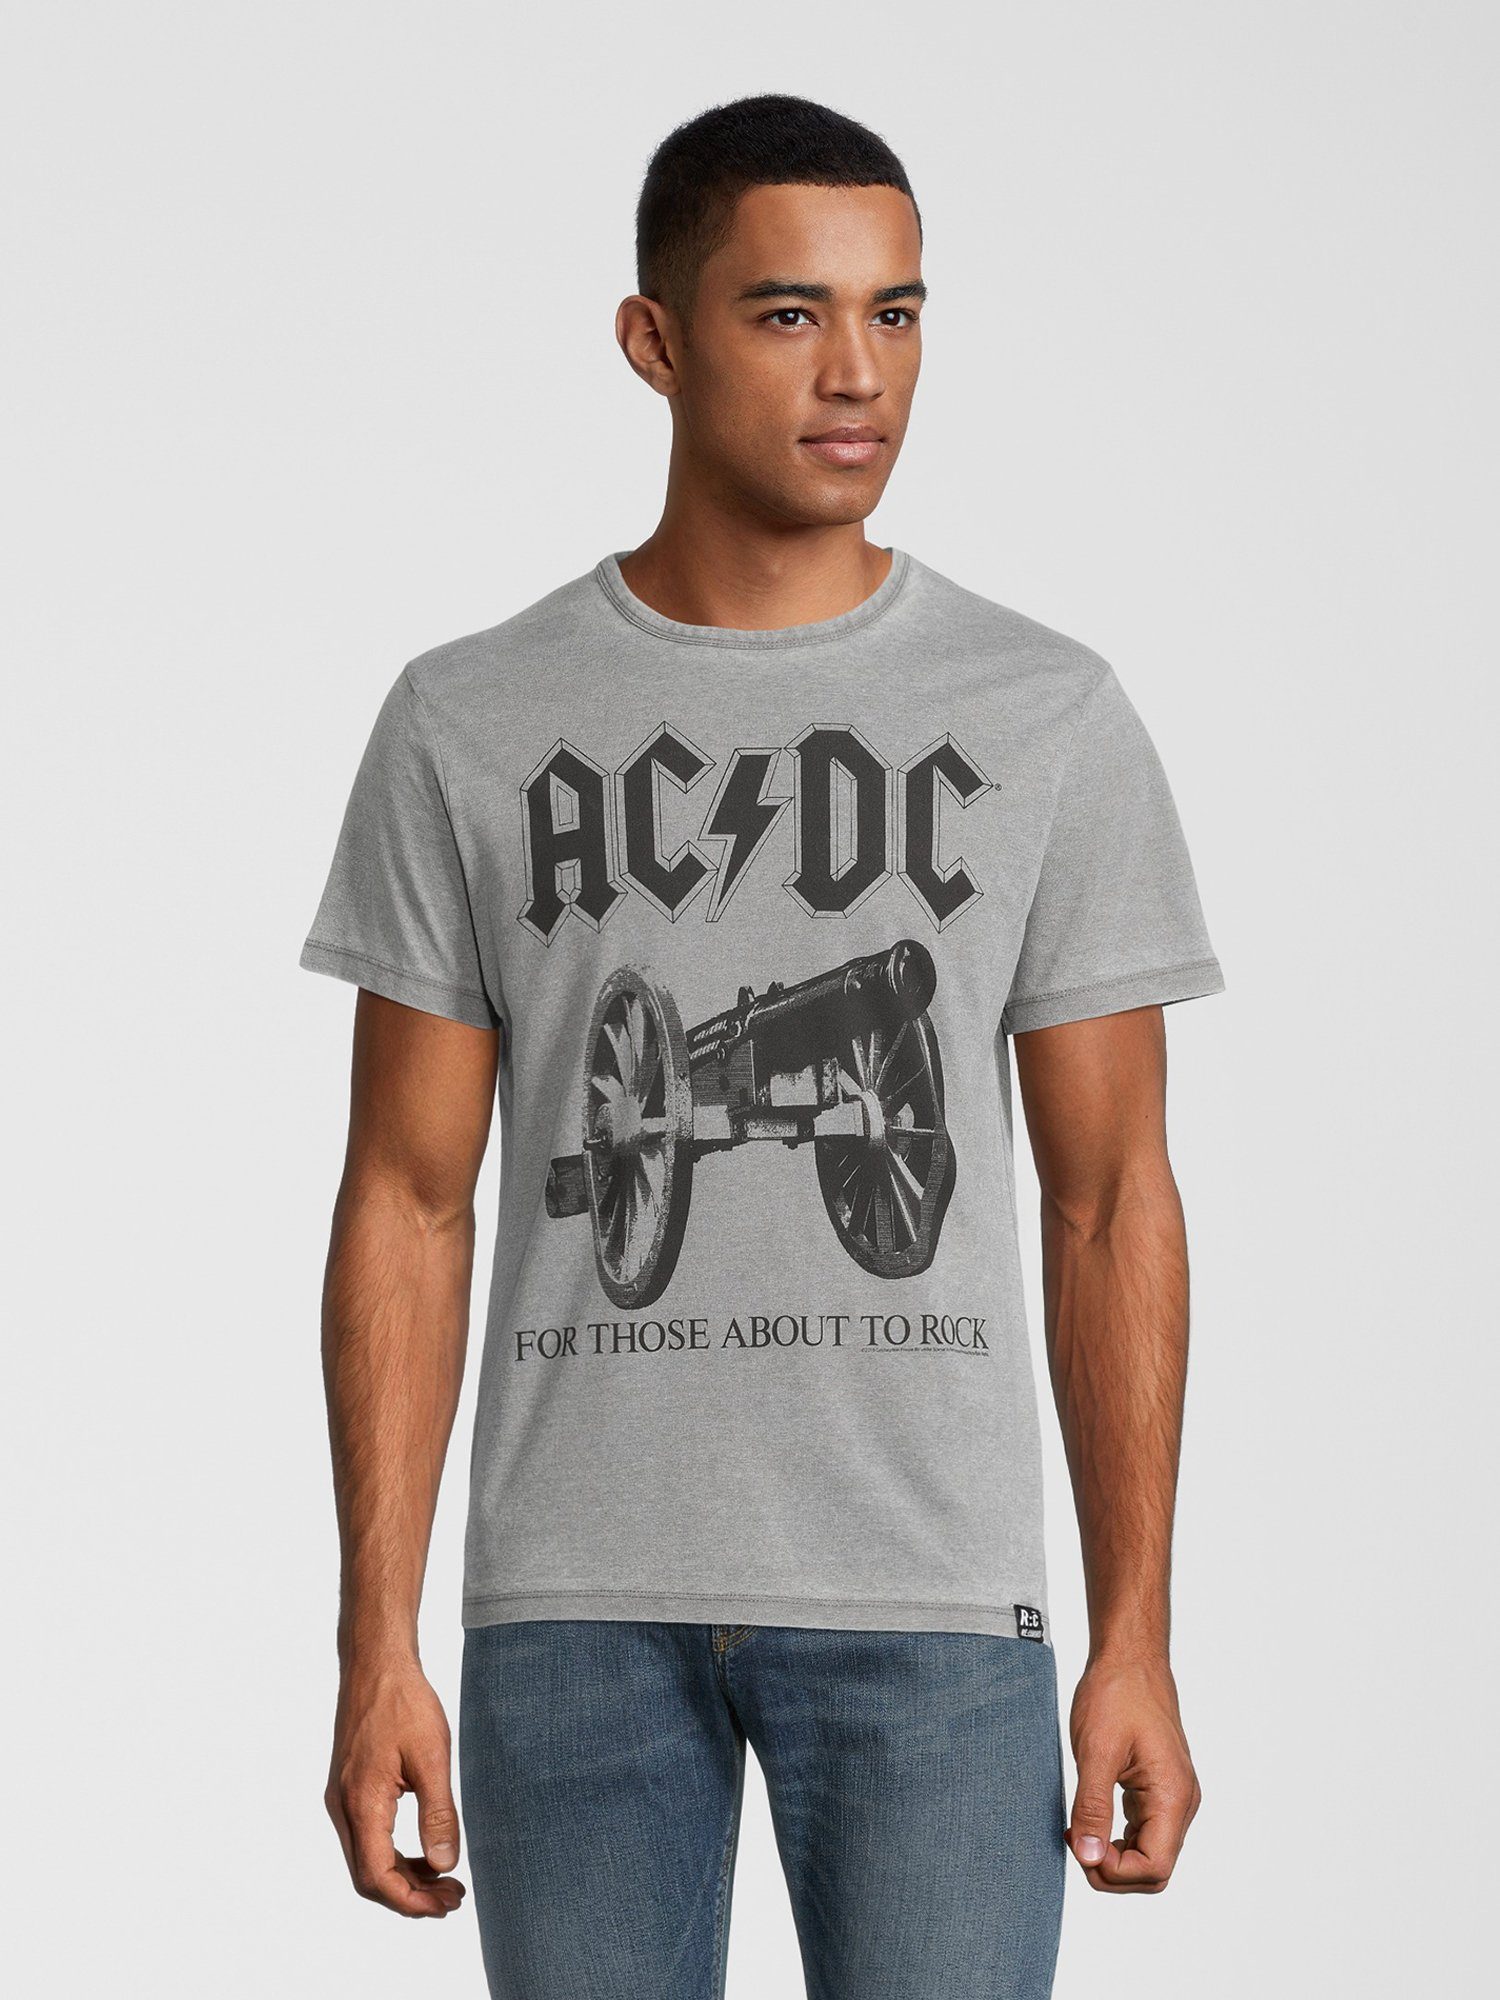 Recovered T-Shirt AC/DC About Rock Those to For